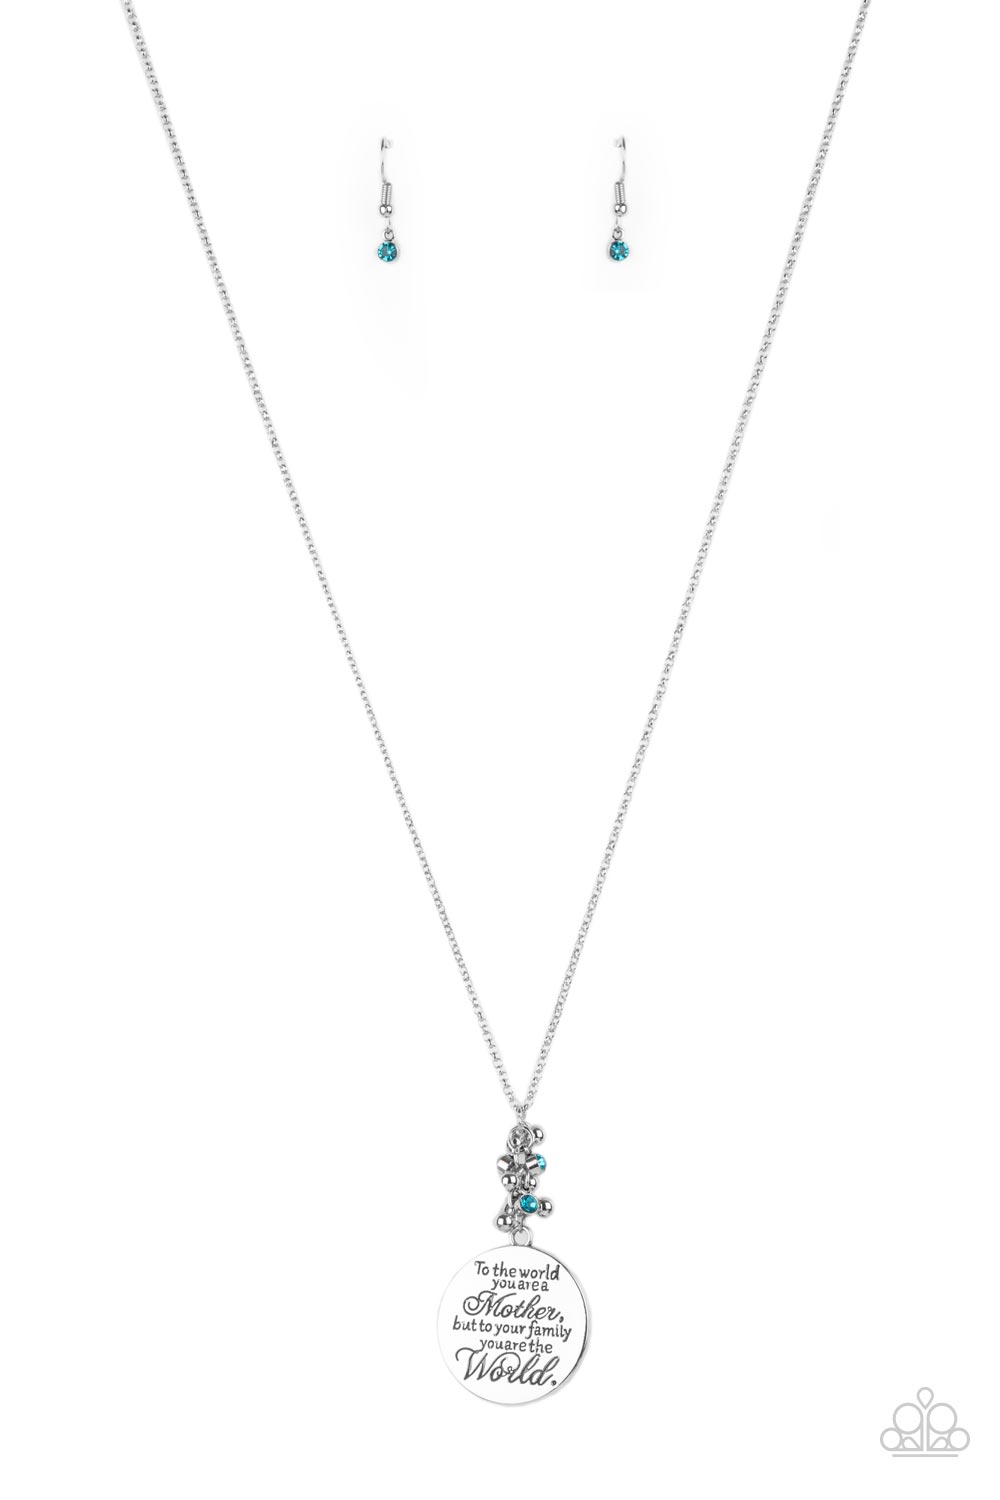 Paparazzi Necklace - Maternal Blessings - Blue